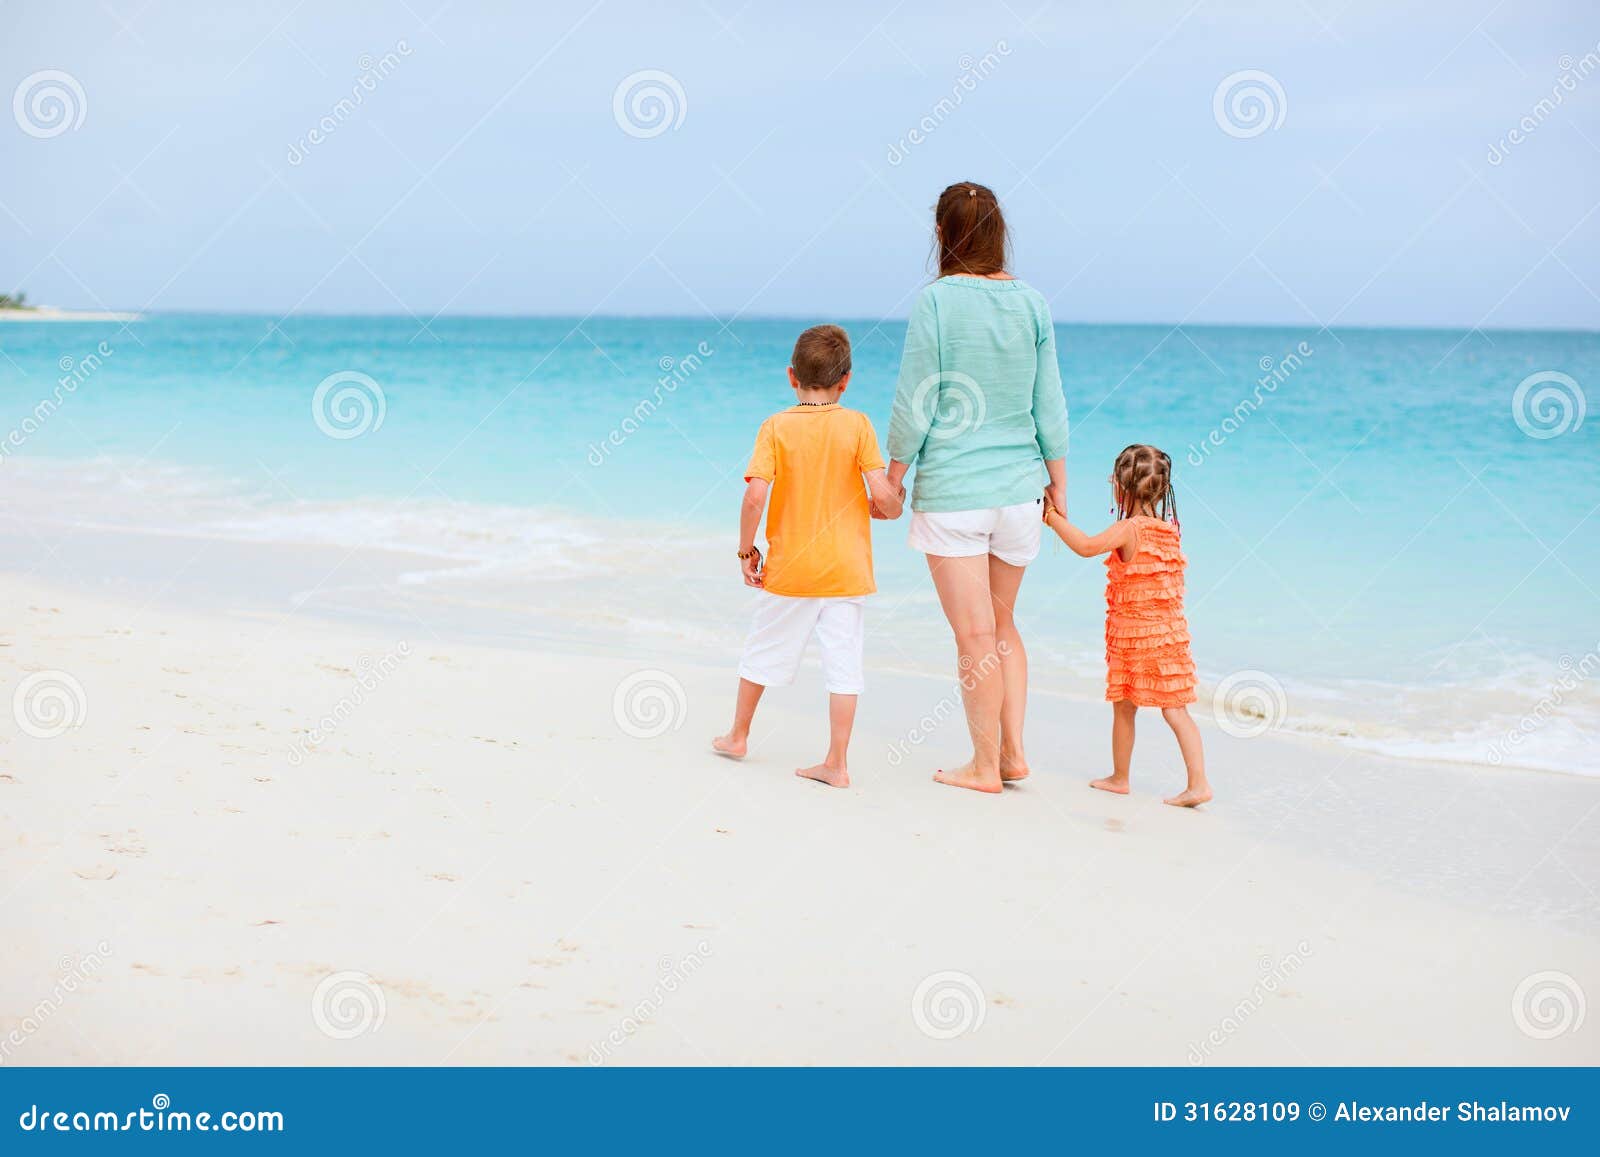 Family On Tropical Vacation Stock Image  Image of 